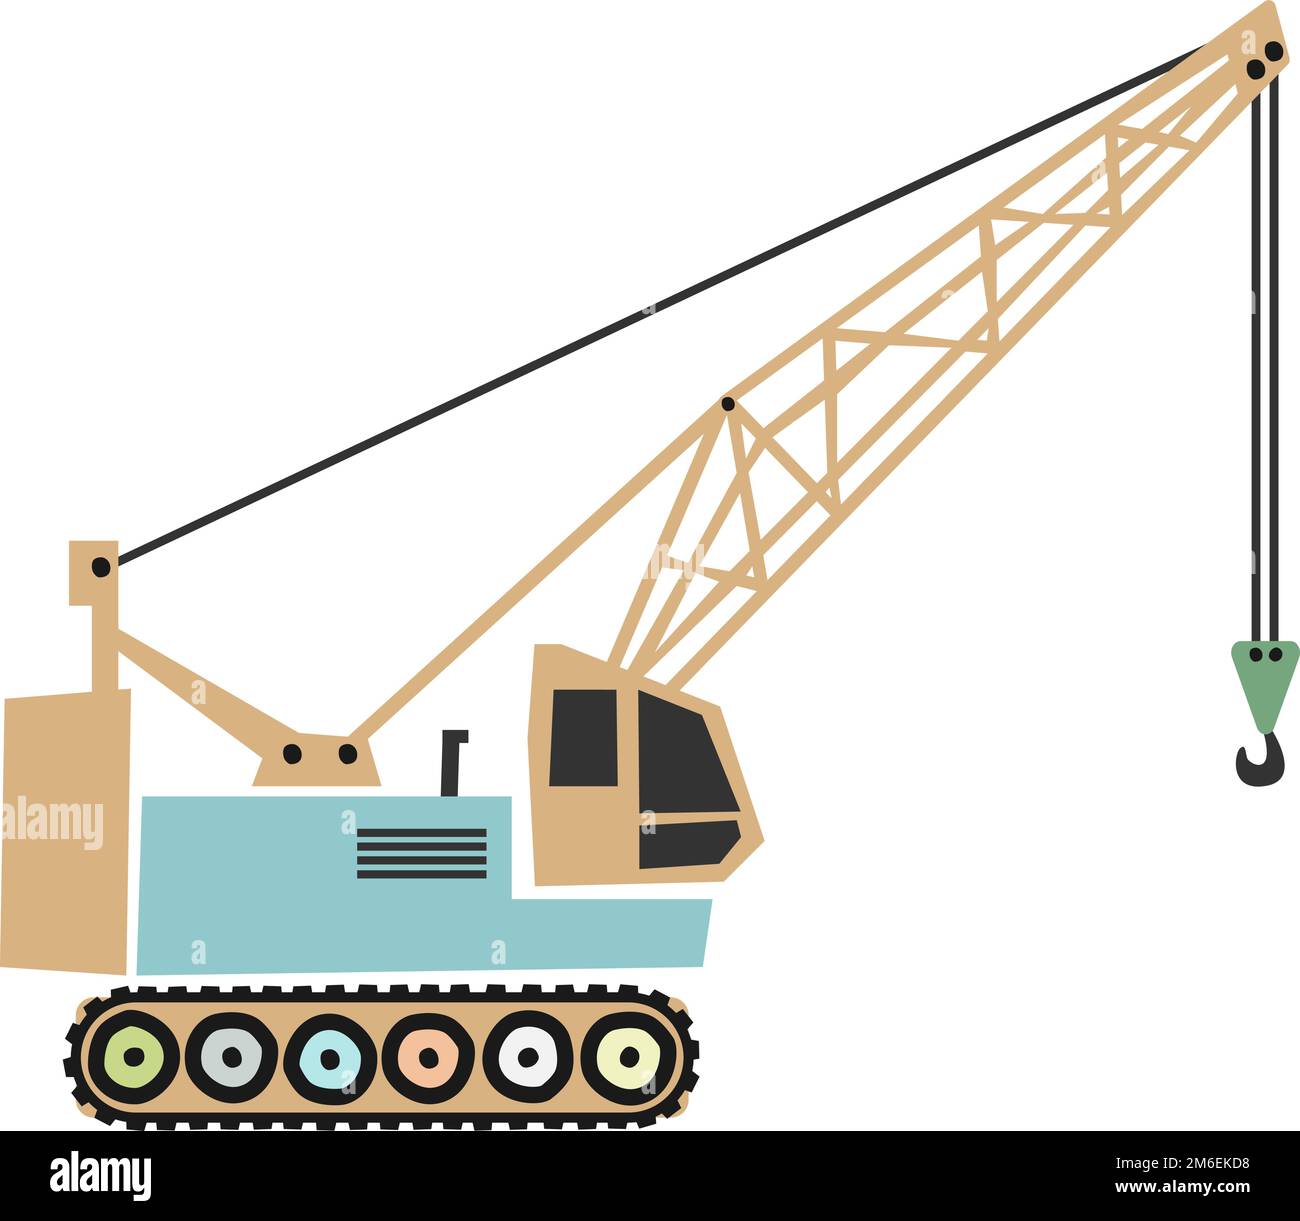 scandi style construction machinery vector illustration for children, crawler crane isolated on white background Stock Vector